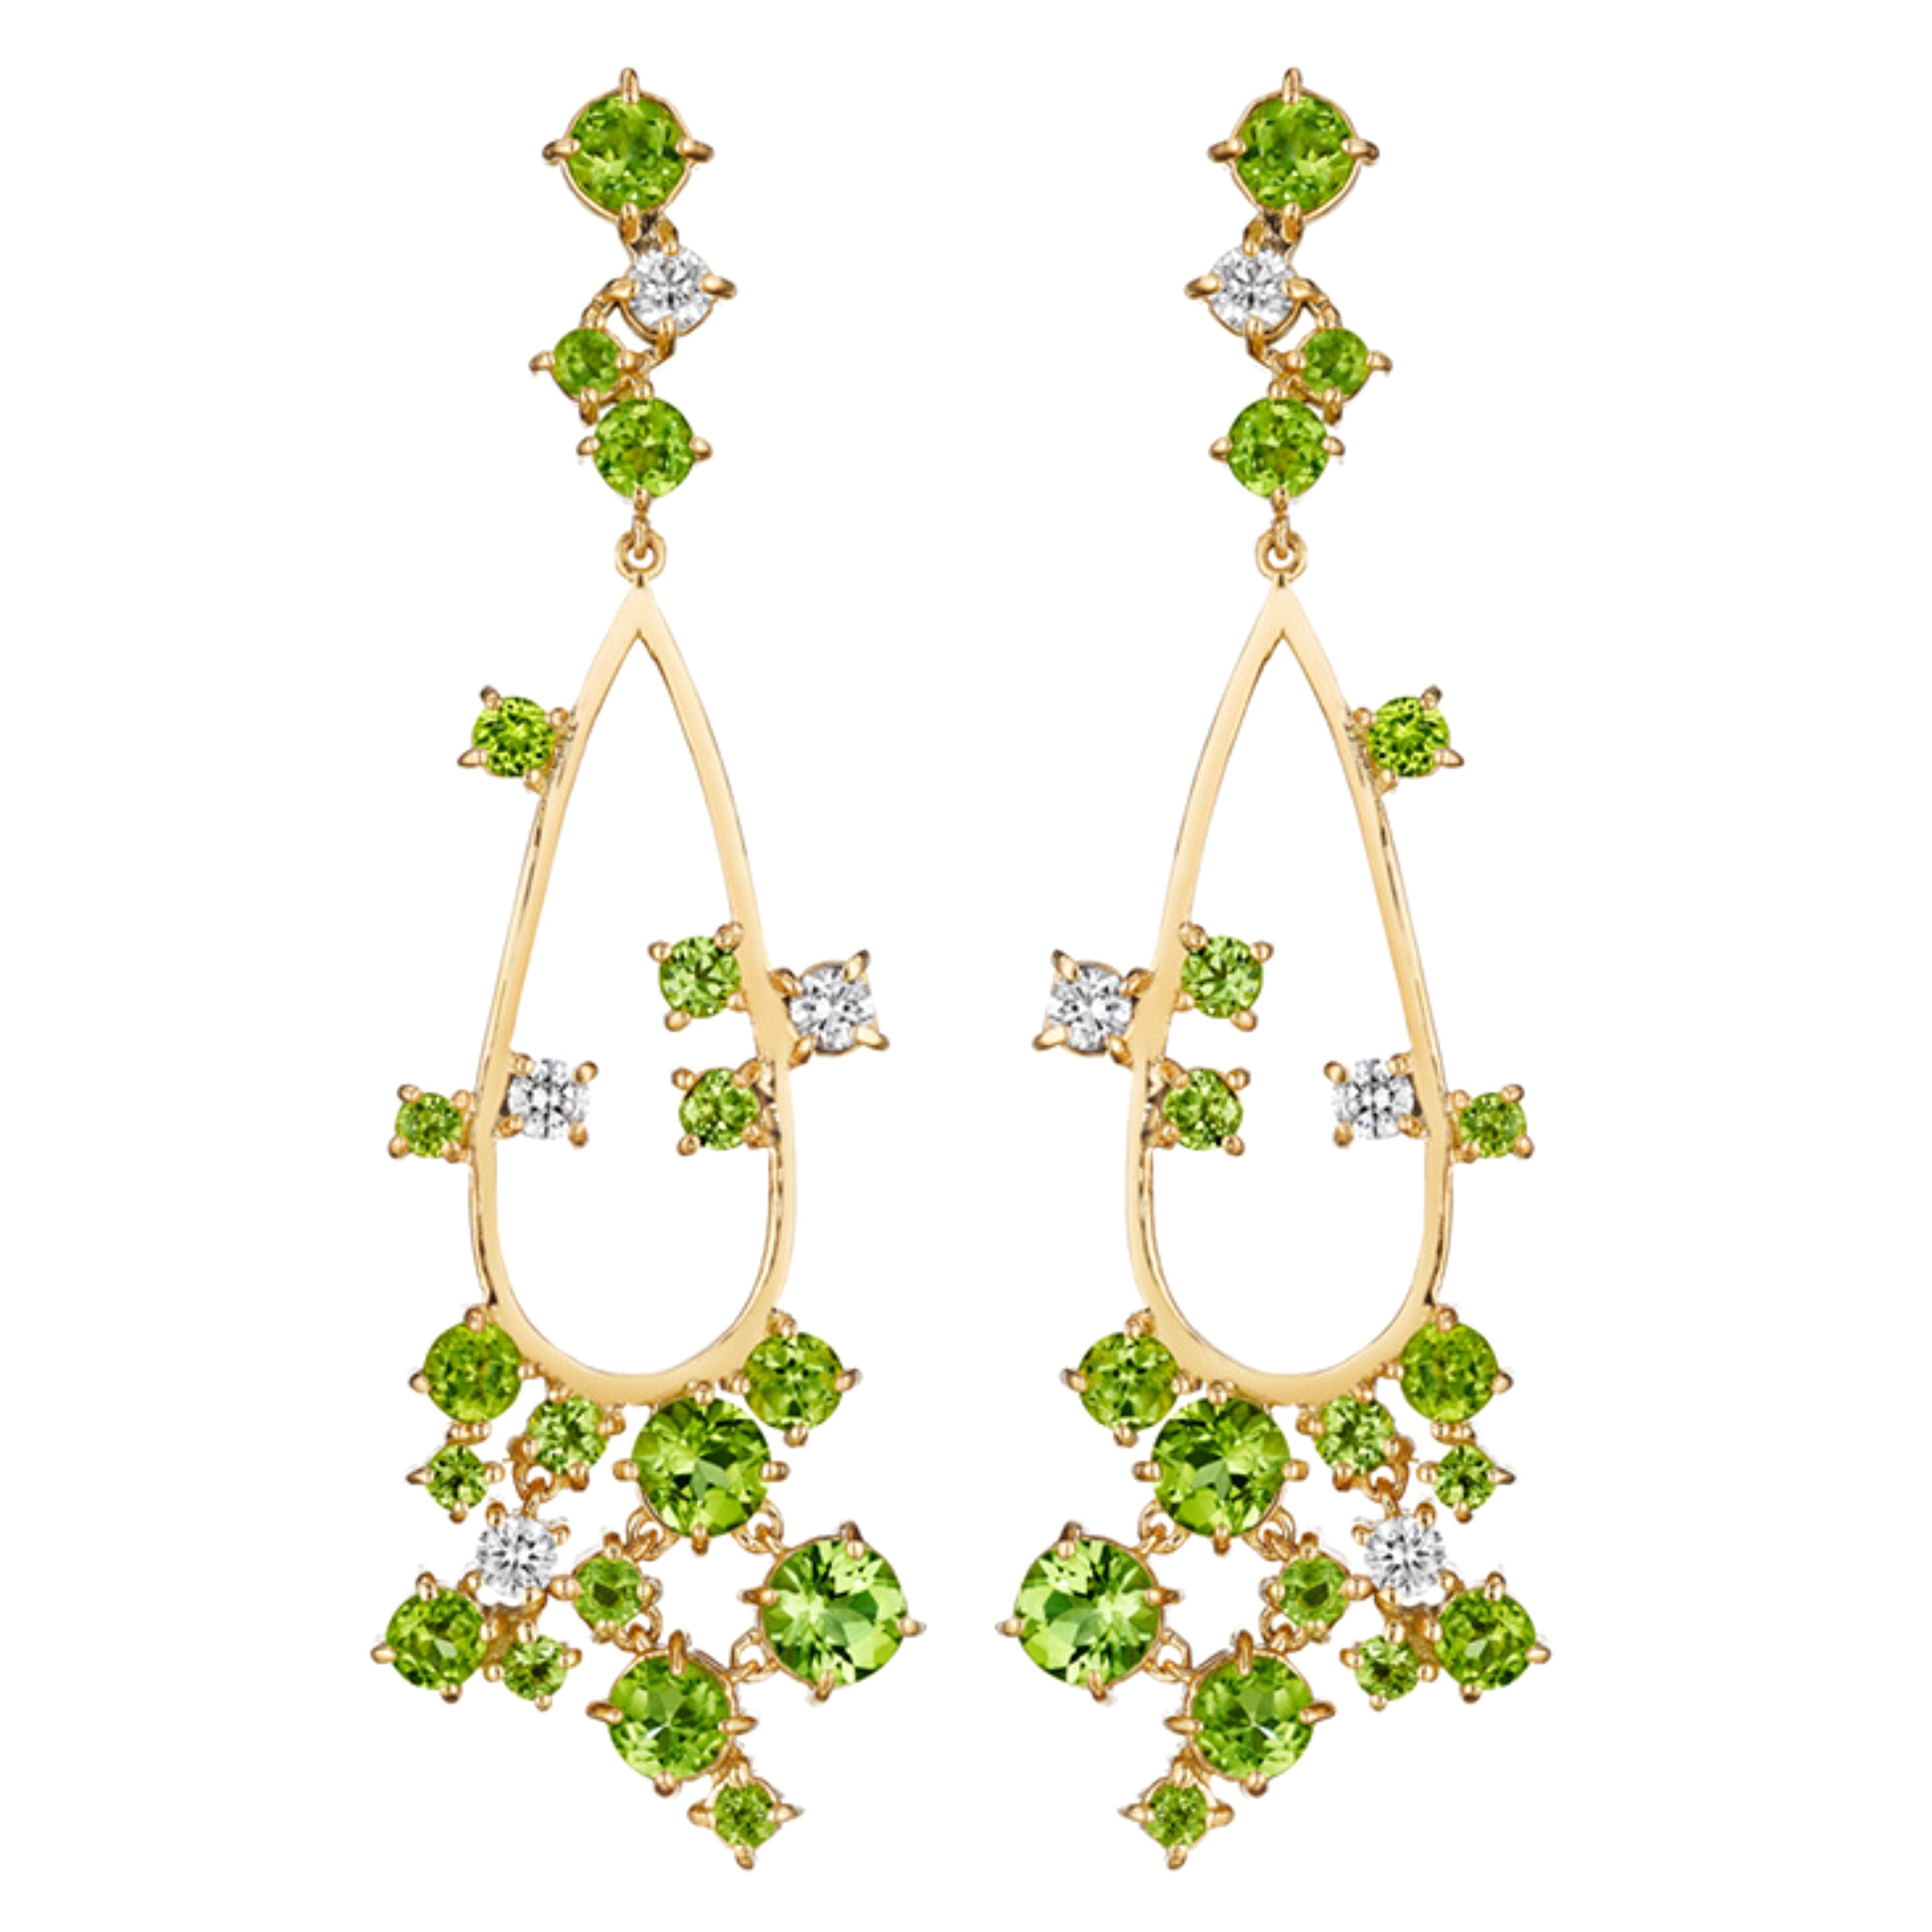 Melting Ice 18k Yellow Gold Peridot and Diamond Earrings by MadStone For Sale